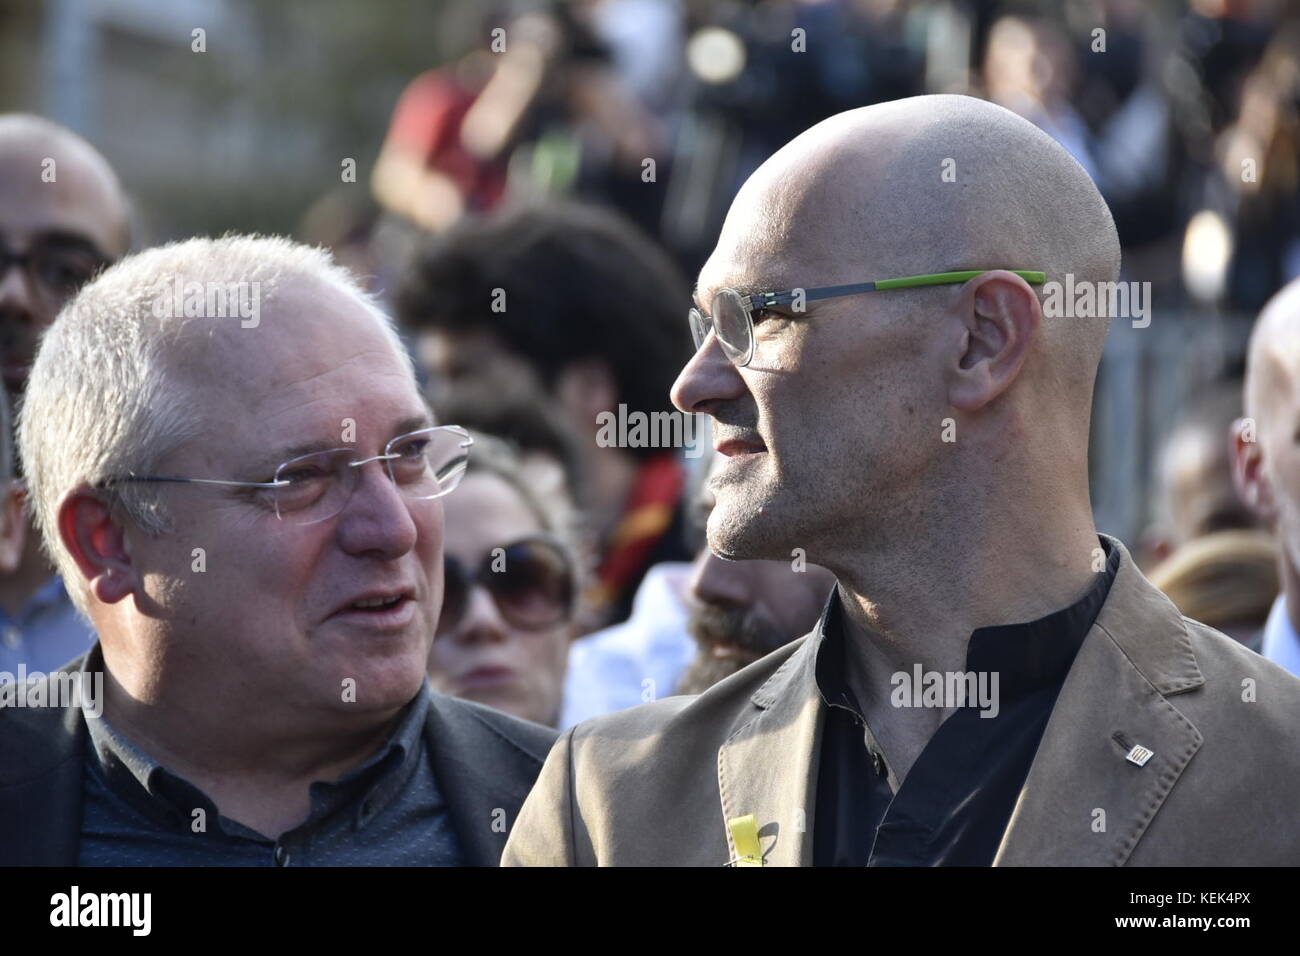 Barcelona, Spain. 21st Oct, 2017. Raul Romeva in the demonstration against the imprisonment of the Catalan leaders Jordi Sánchez and Jordi Cuixart in Barcelona. Thousands of people are demanding their release and the proclamation of the Republic of Catalonia.  Credit: Carles Desfilis / Alamy Live News Stock Photo